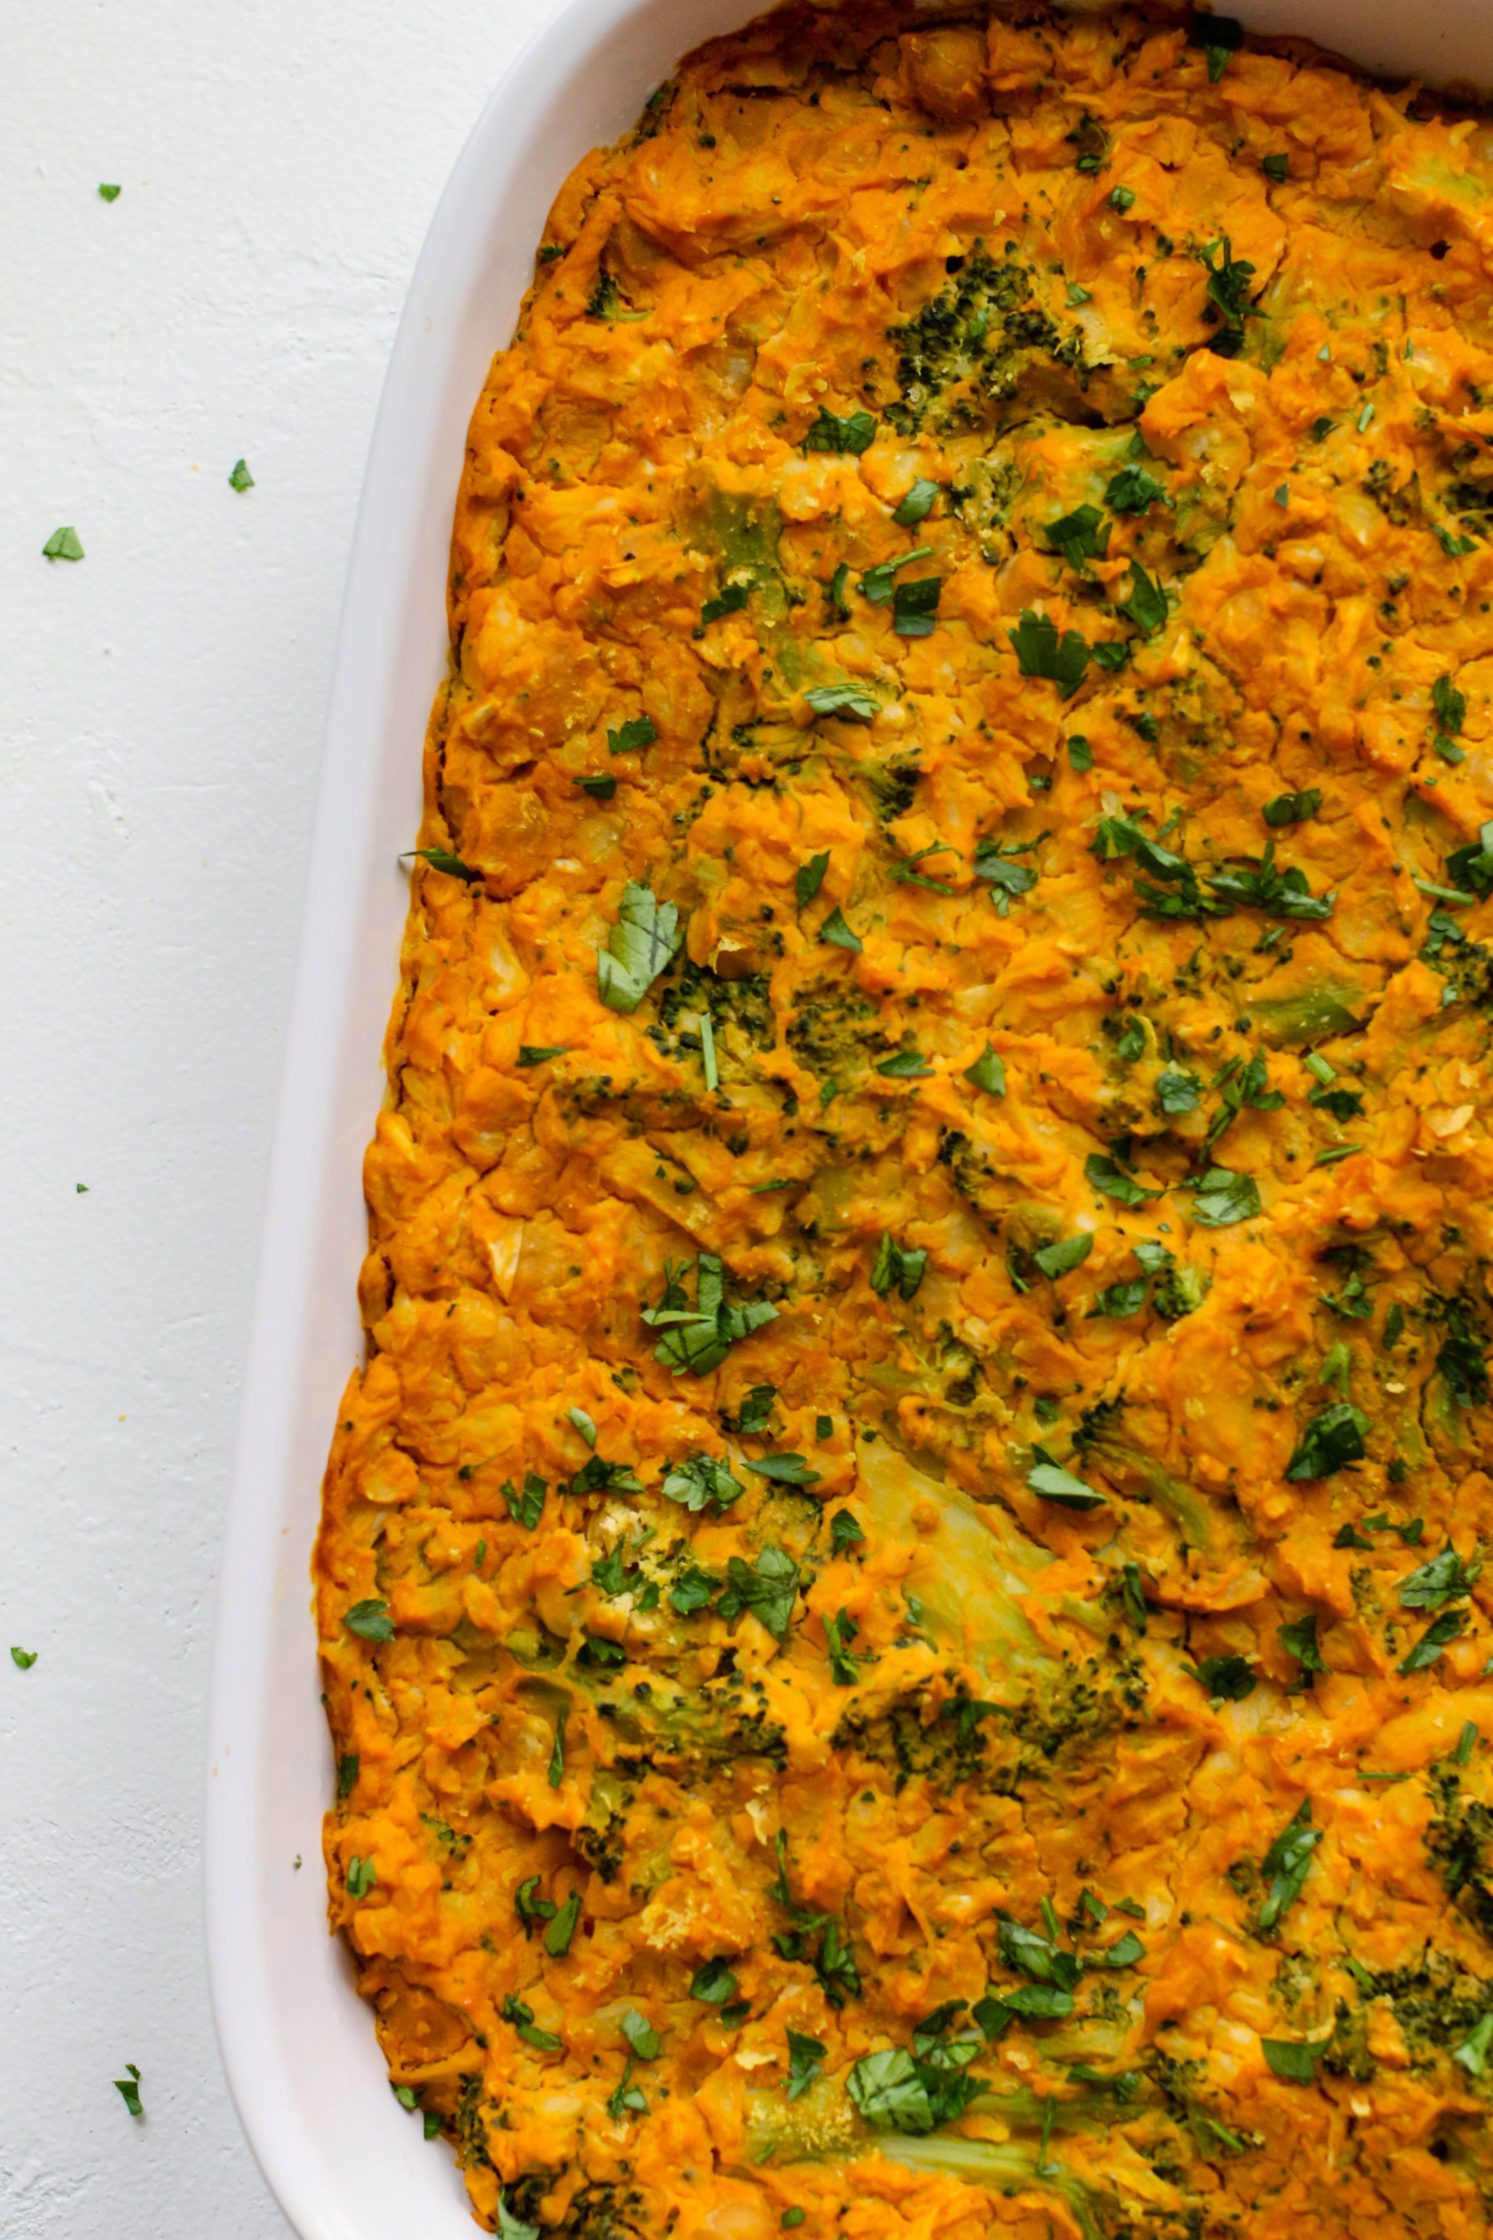 “Cheezy” Chickpea & Broccoli Casserole in casserole dish with parsley on top by Flora & Vino